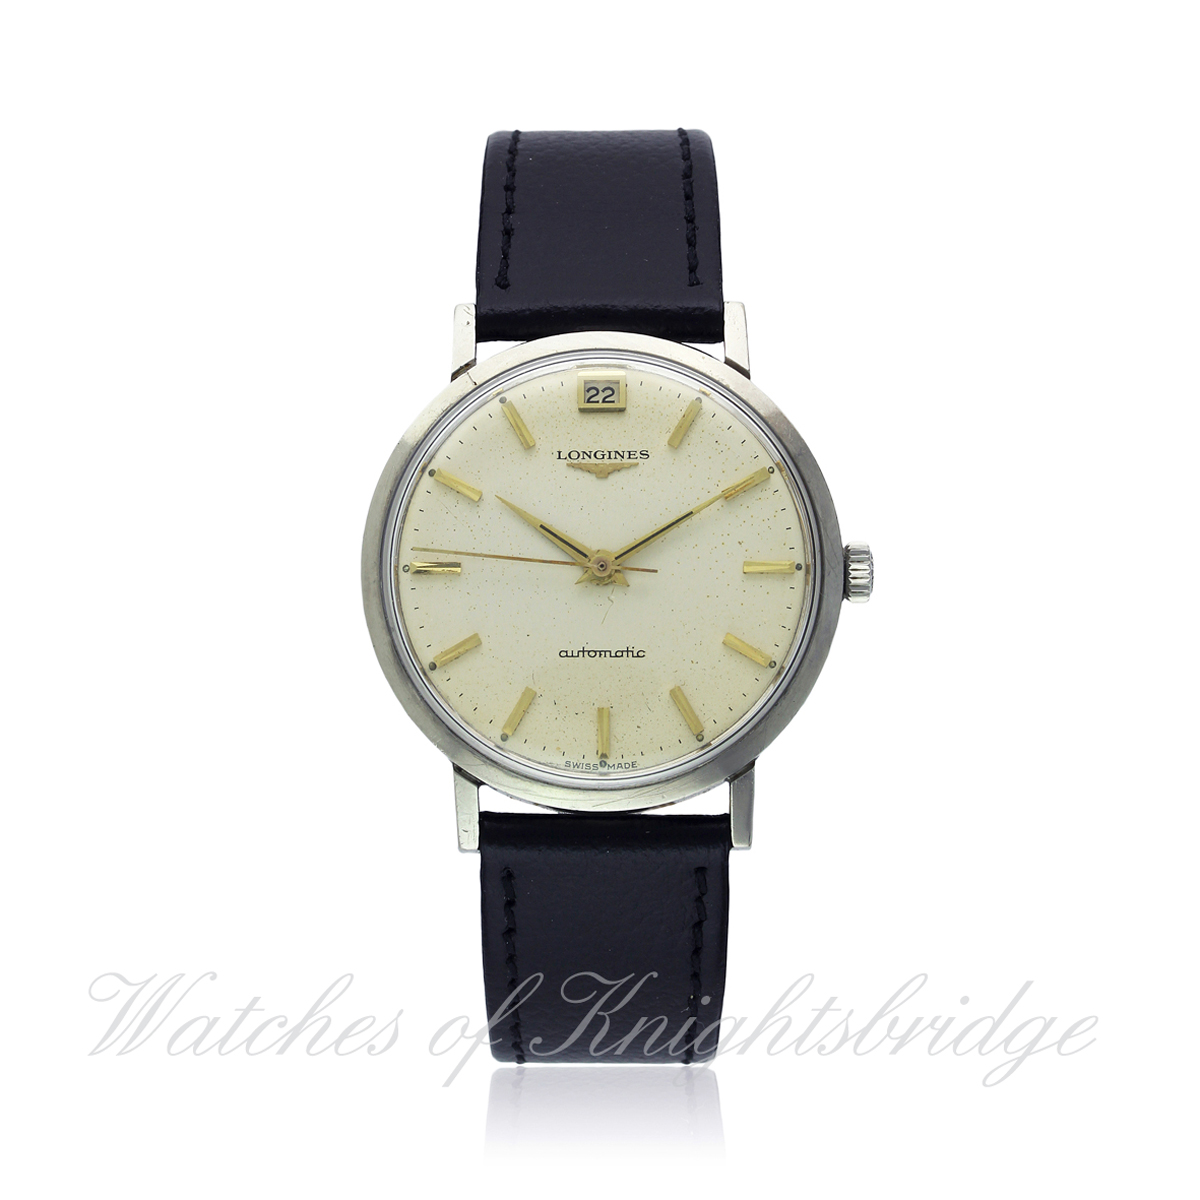 A GENTLEMAN`S STAINLESS STEEL LONGINES AUTOMATIC DATE WRIST WATCH CIRCA 1961 REF. 7844 3 D: Silver